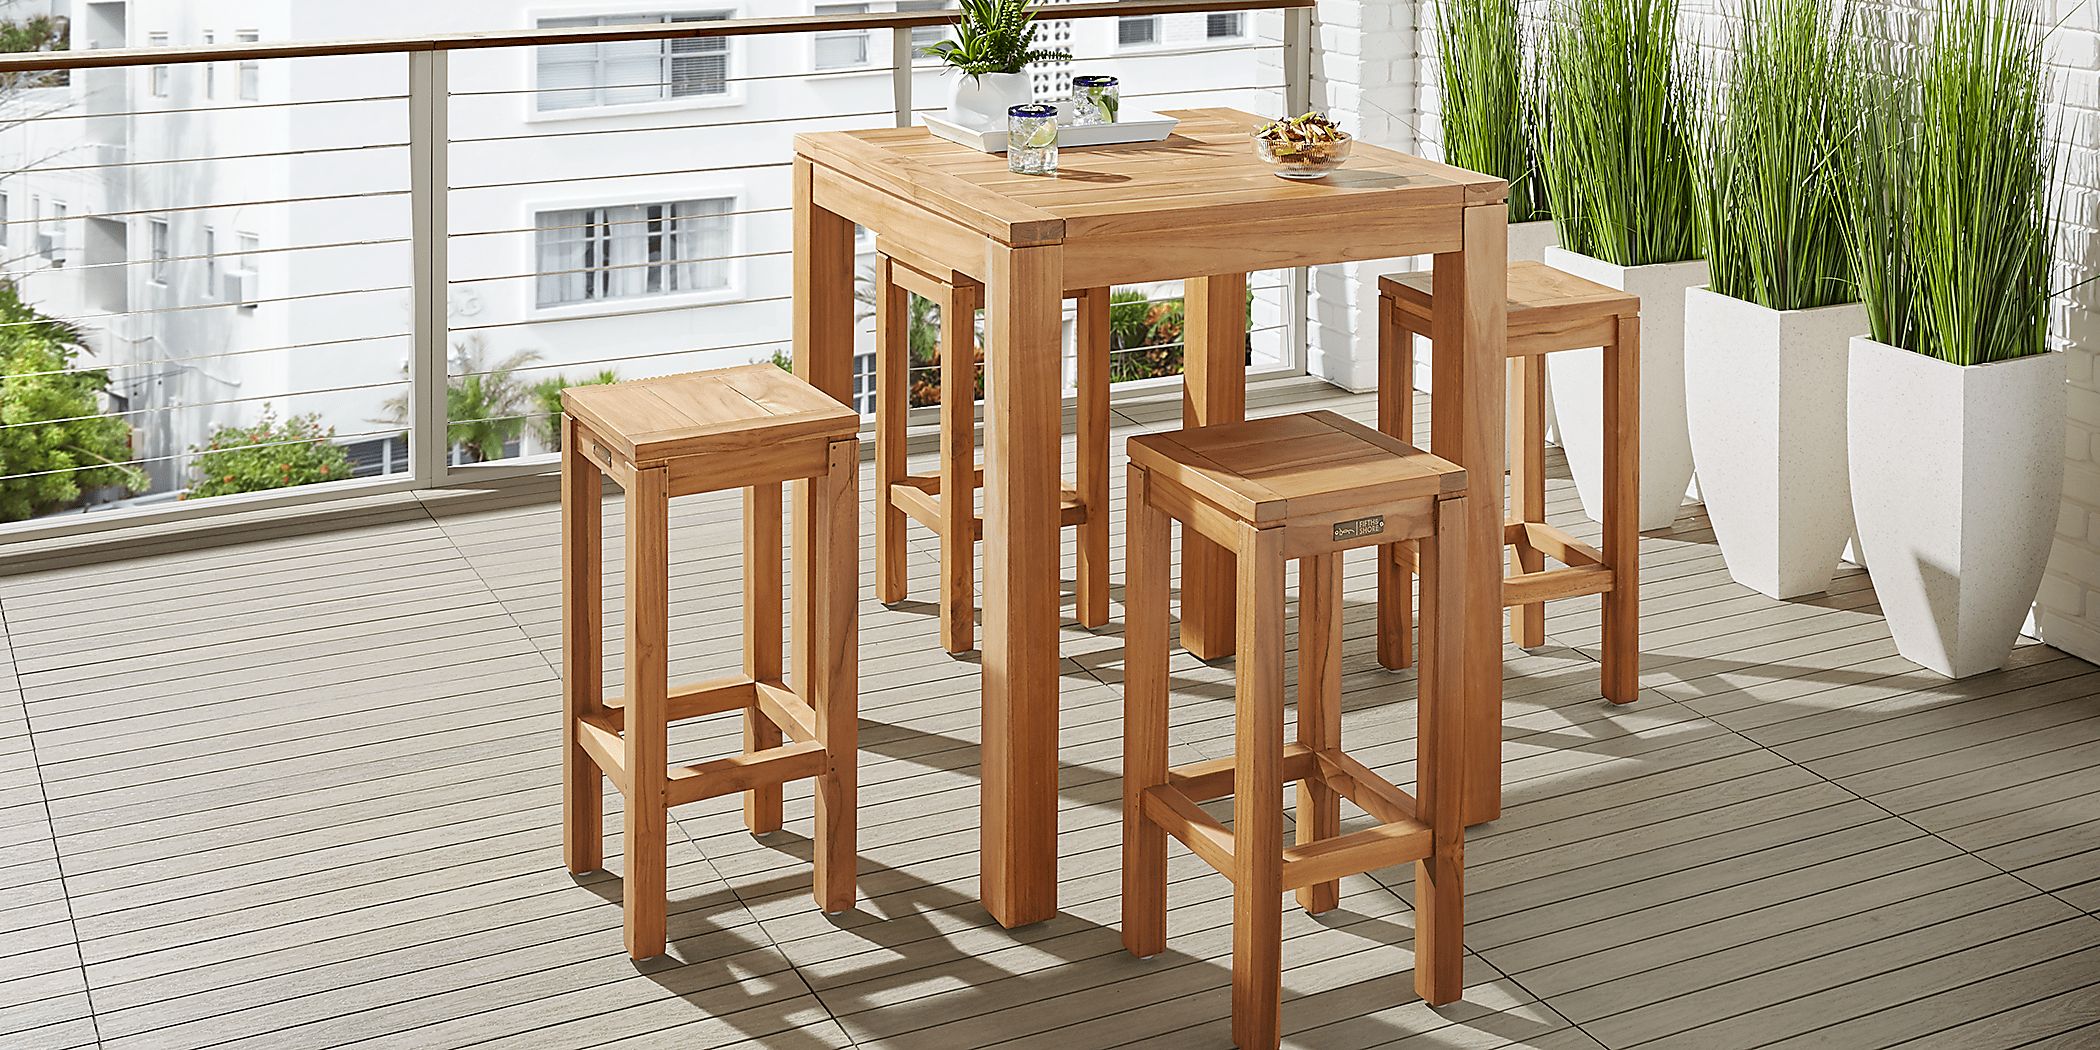 Patmos Teak 5 Pc 36 in. Square Bar Height Outdoor Dining Set